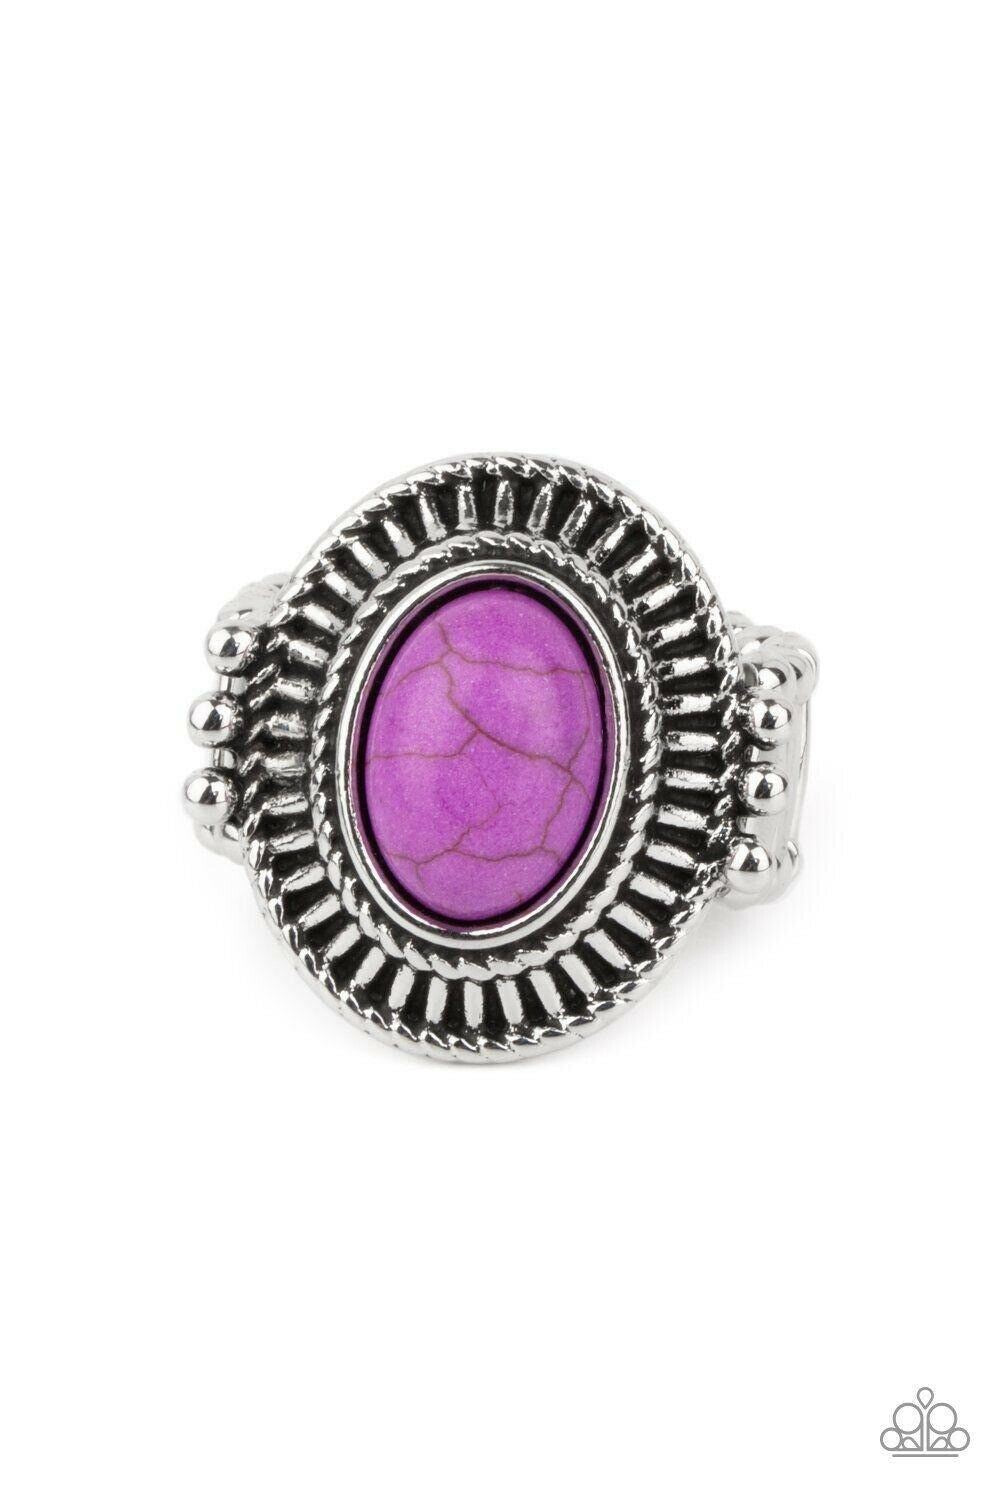 BADLANDS To The Bone - Purple Stretchy Ring Paparazzi Jewelry Accessories 7805